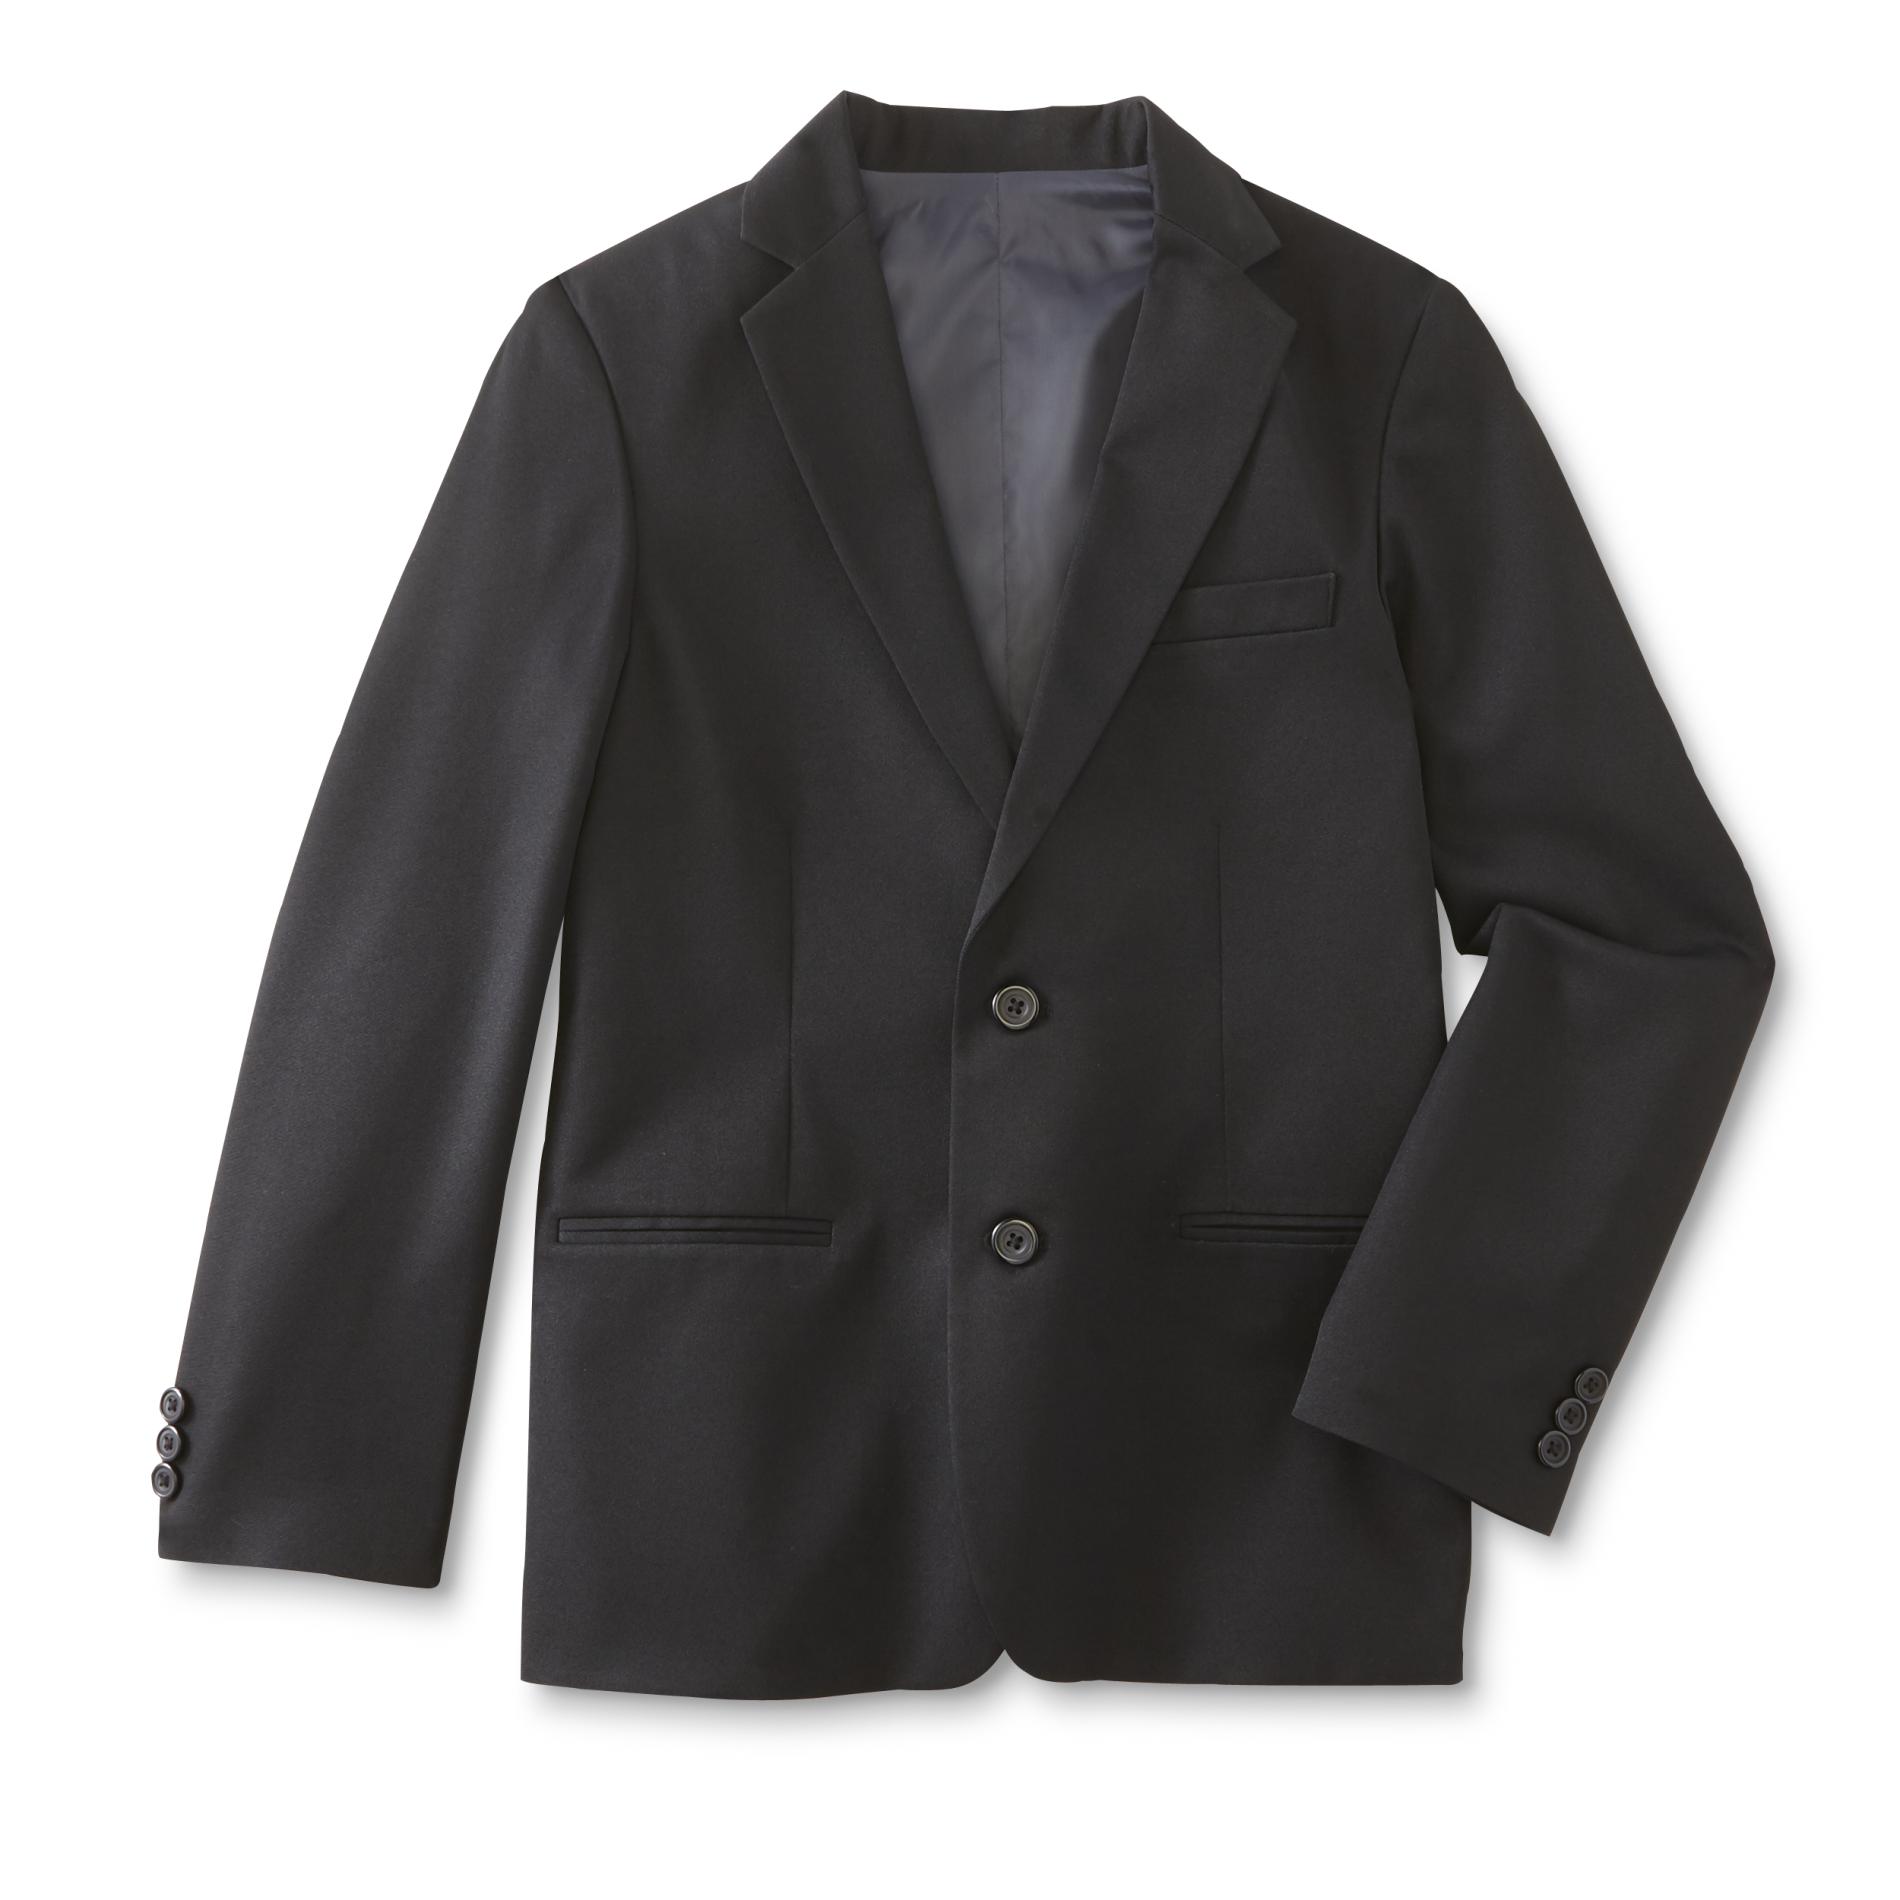 Holiday Editions Boys' Suit Jacket